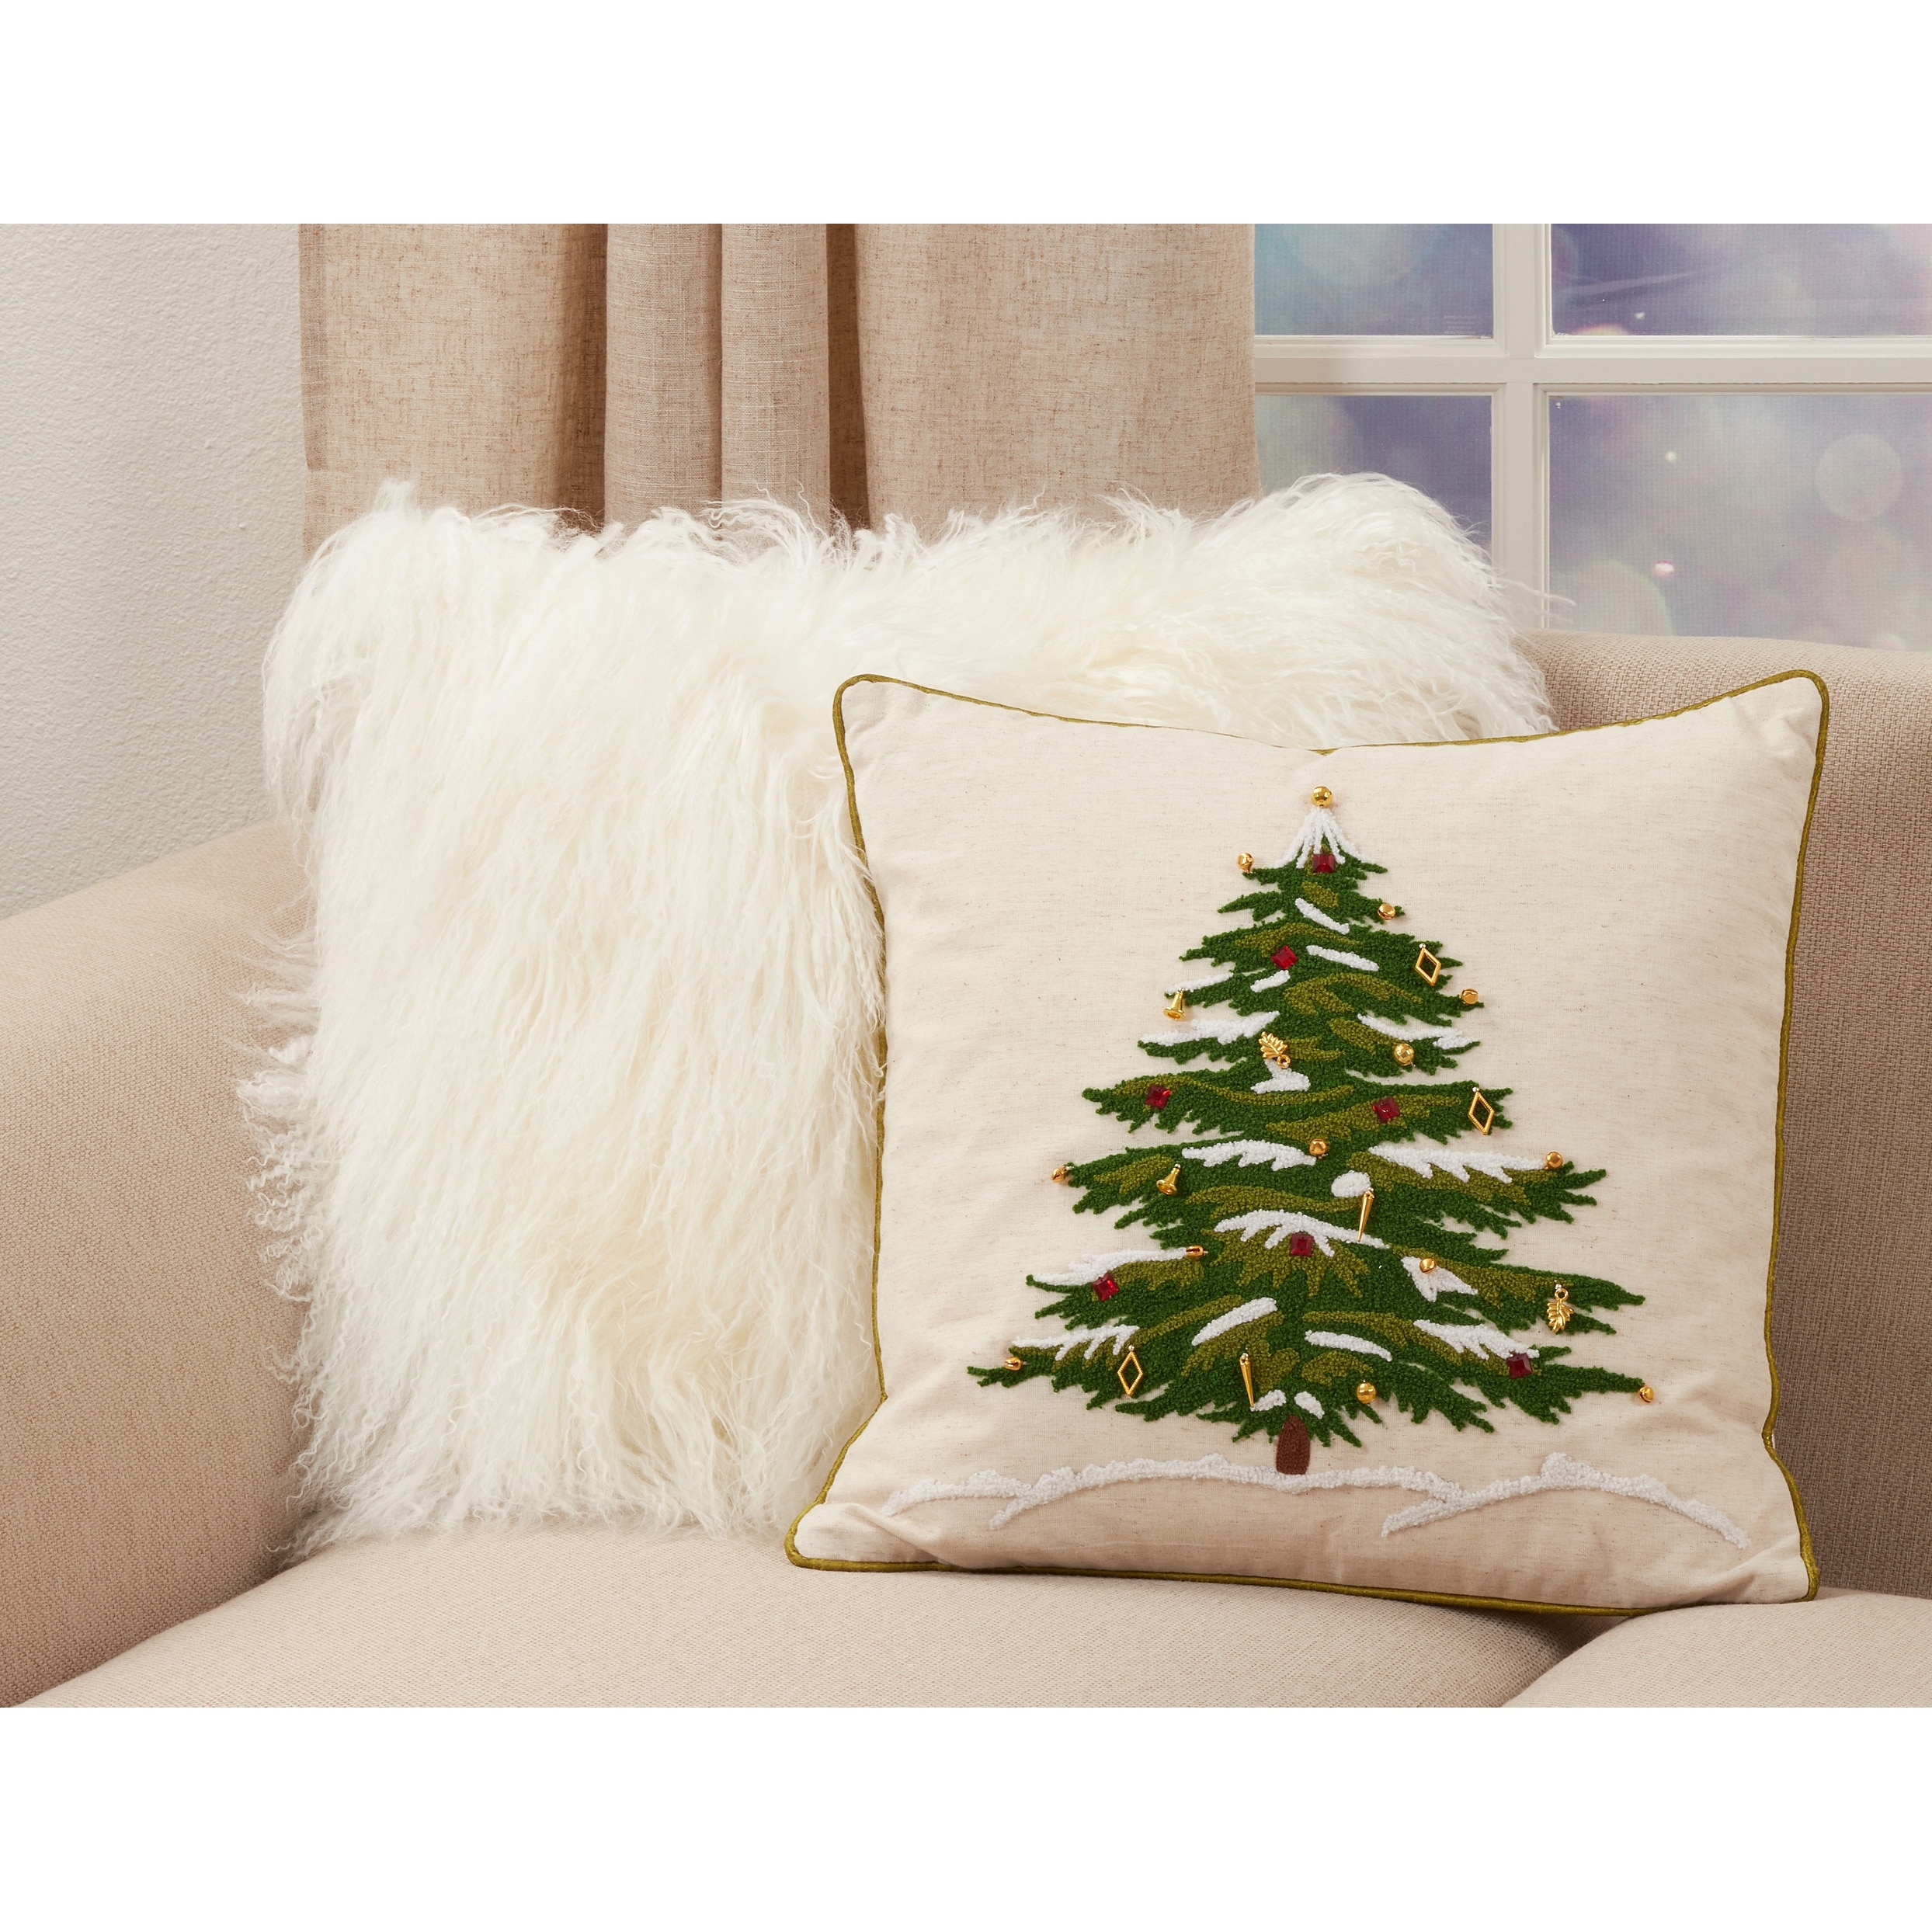 https://ak1.ostkcdn.com/images/products/is/images/direct/943bf5d68d9e892c5ece7d3bf8b1fd3f9a08ecc2/Pillow-With-Embroidered-Christmas-Tree-Design.jpg